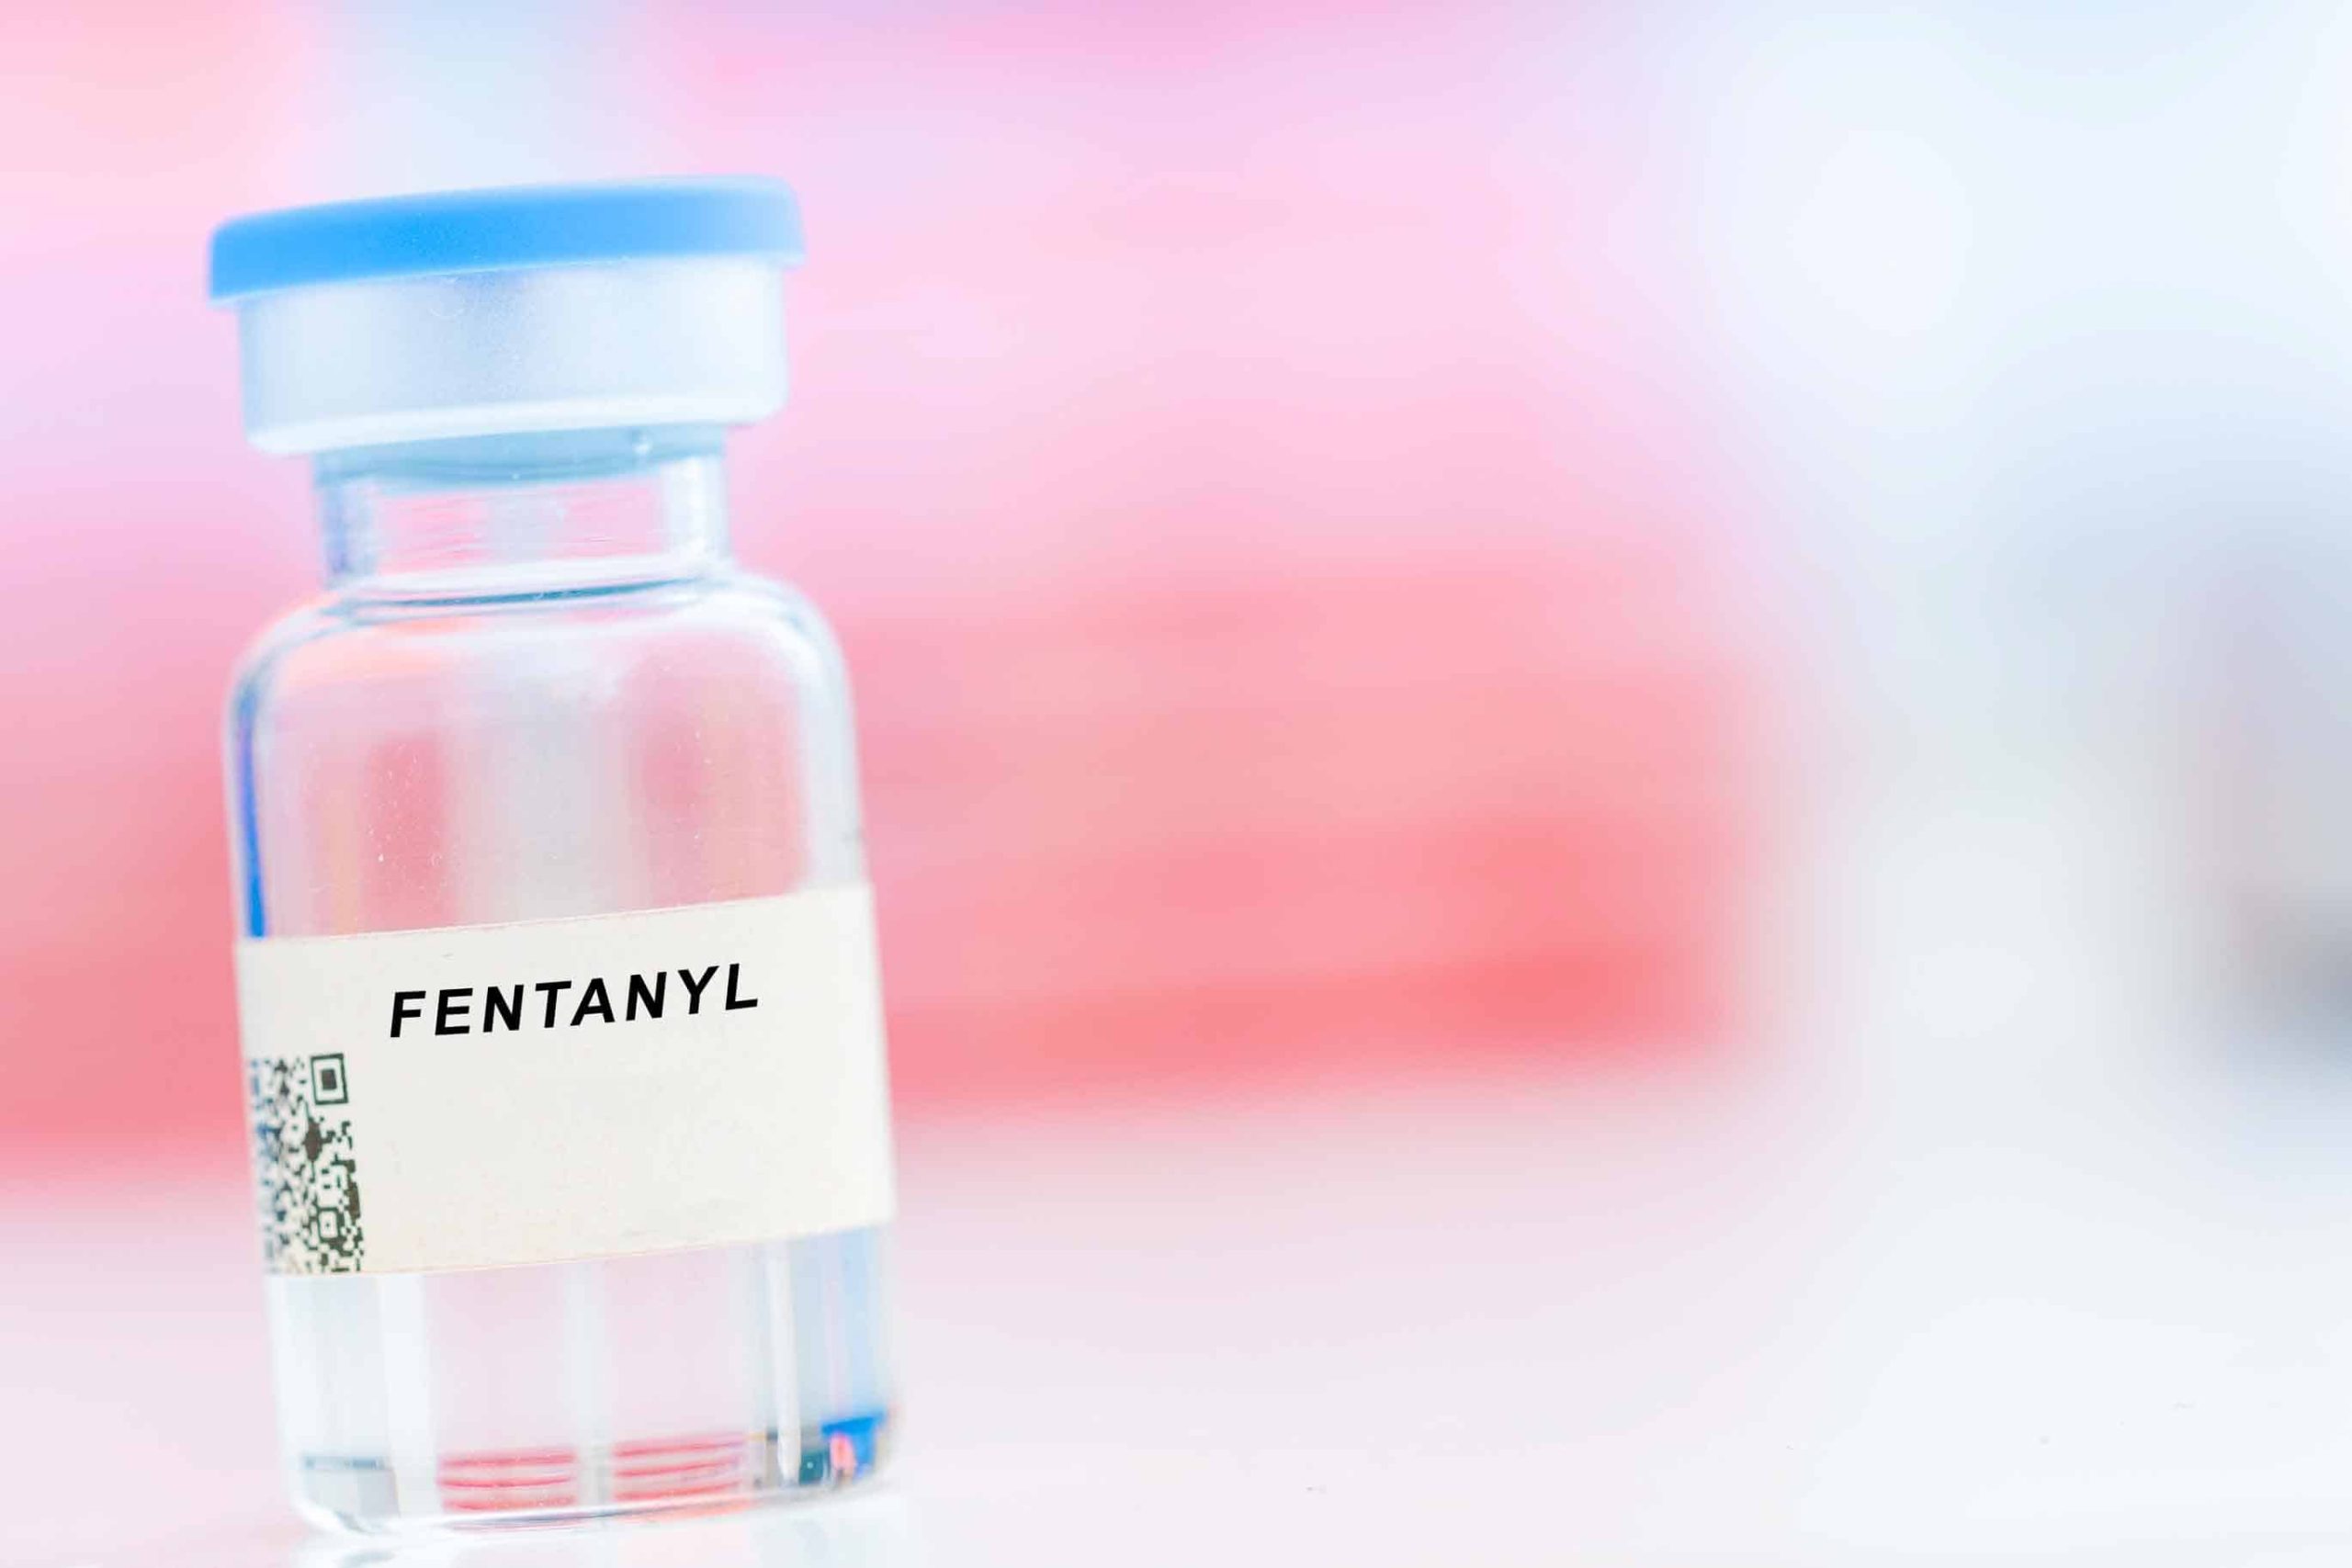 Fentanyl Overdoses See Dramatic Spike in U.S., According to Report